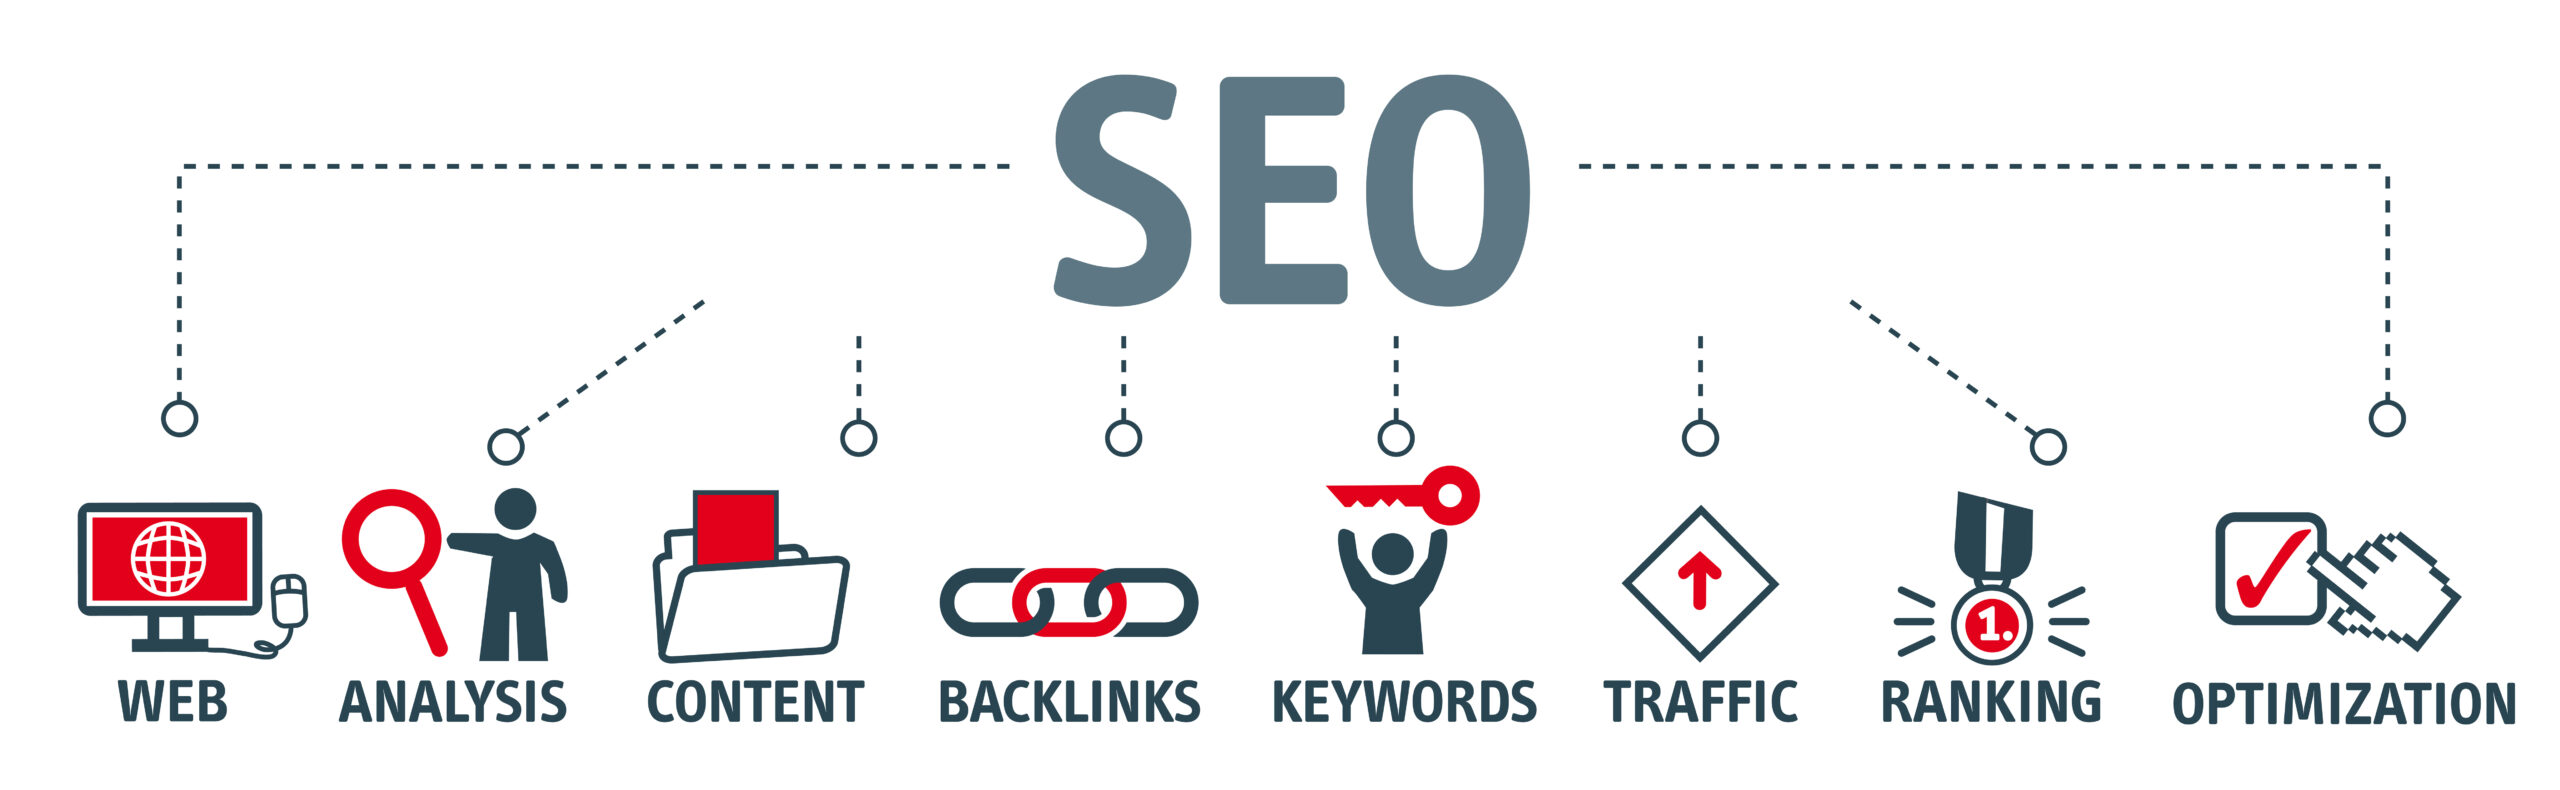 seo packages for small business seo timeline